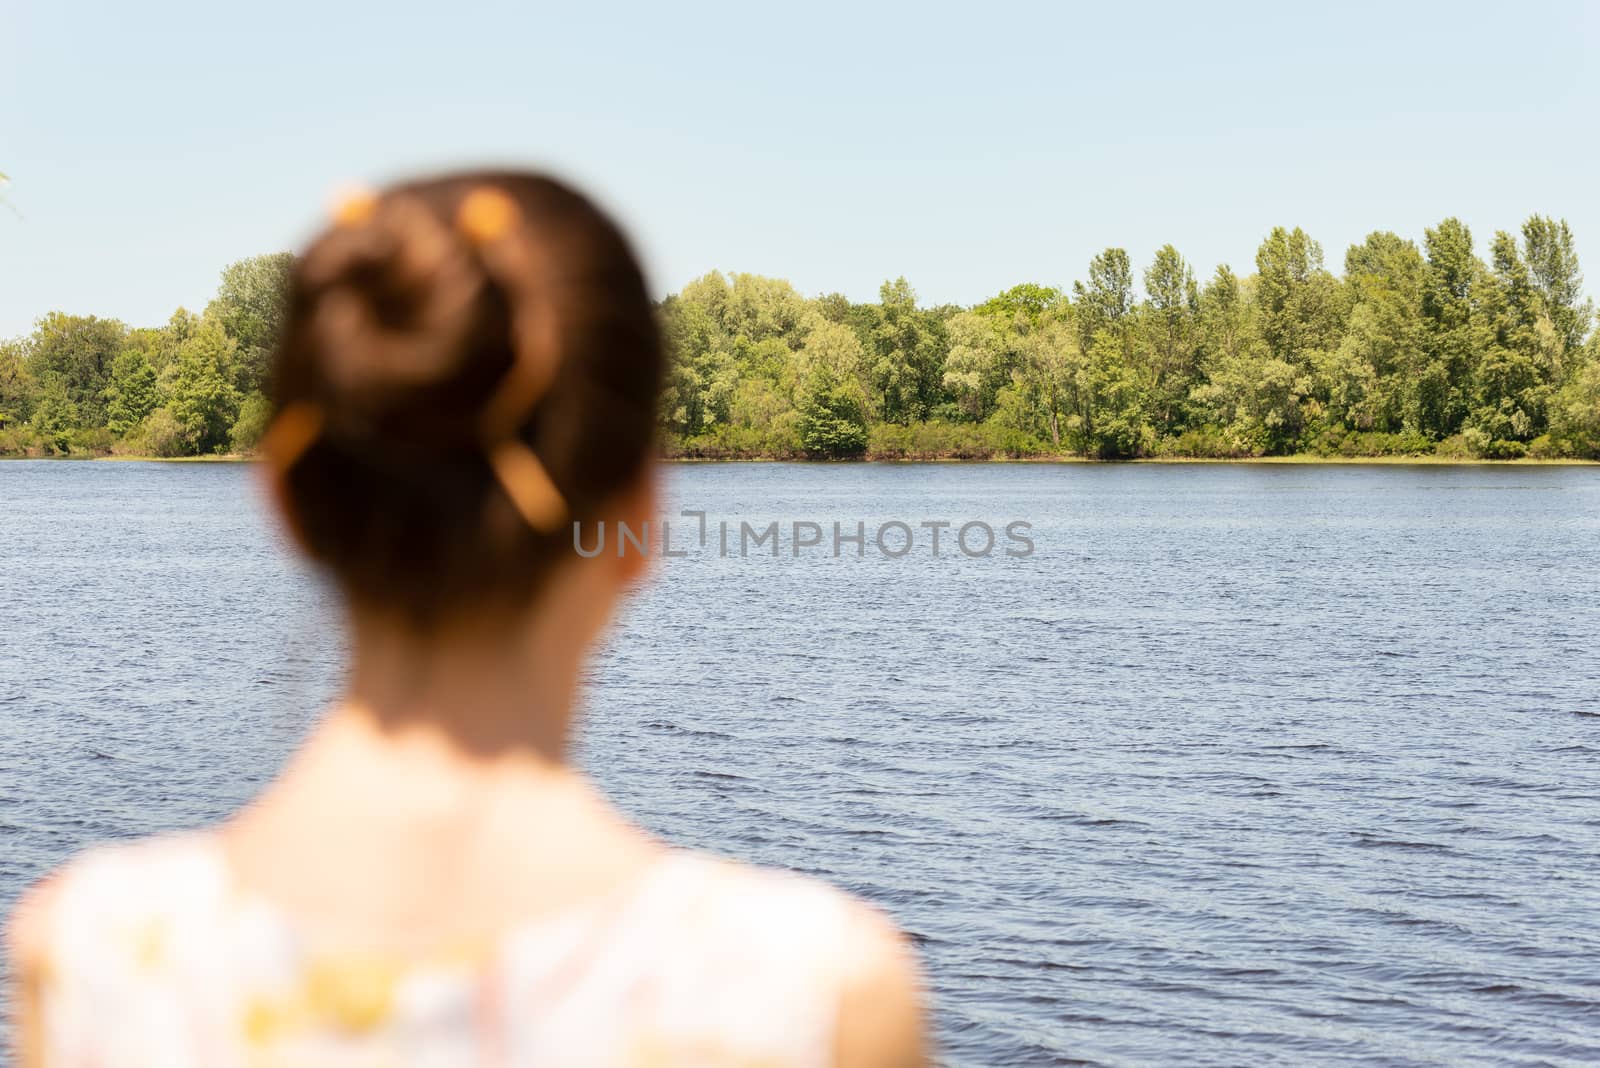 A woman with a chignon, standing up close to the Dnieper river in Kiev, Ukraine, observes the trees in the distance. The silhouette of the lady is out of focus, against a focused background.